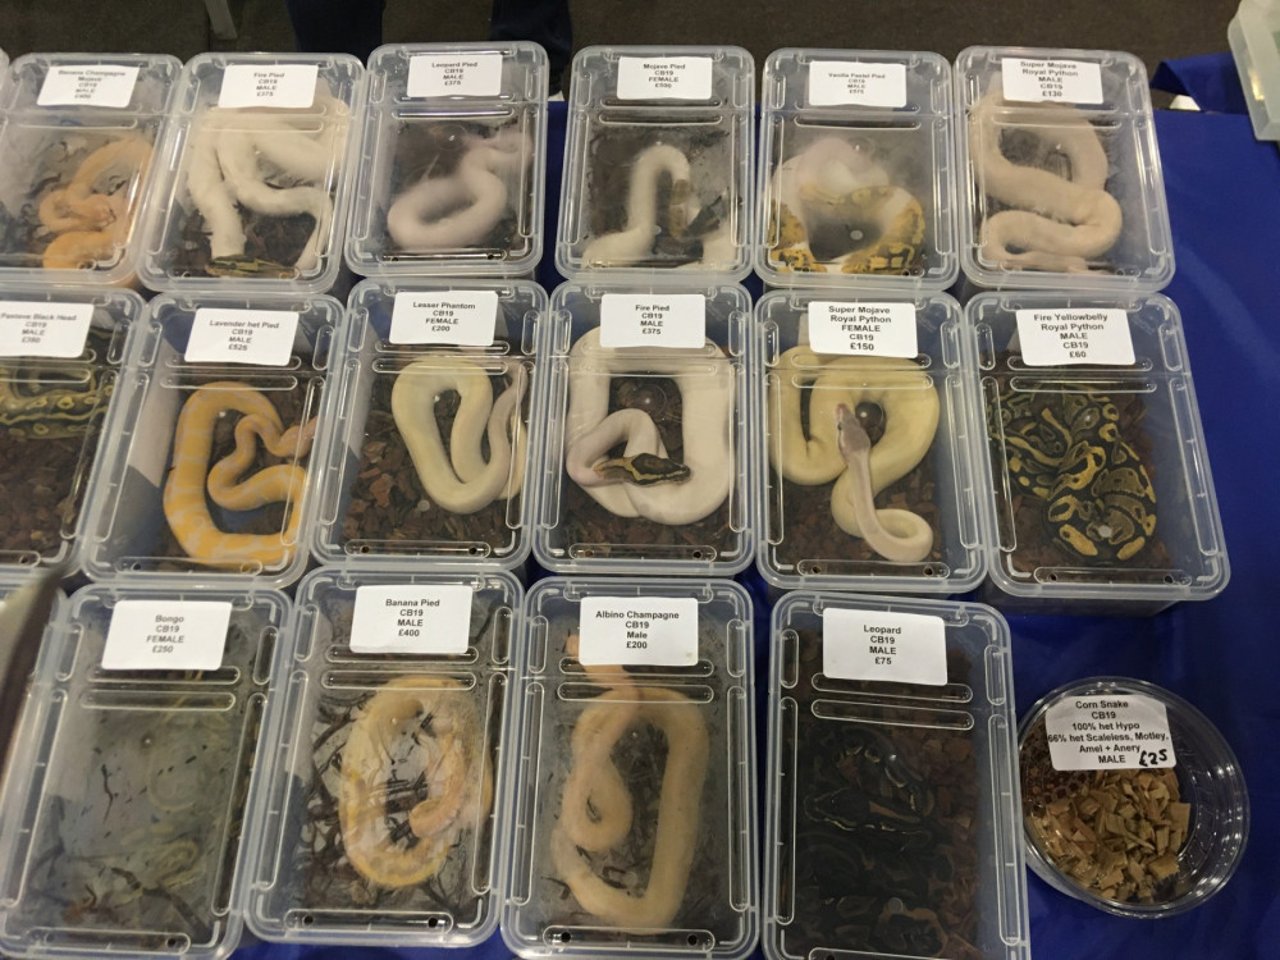 Ball pythons for sale at a pet expo - Wildlife. Not pets - World Animal Protection